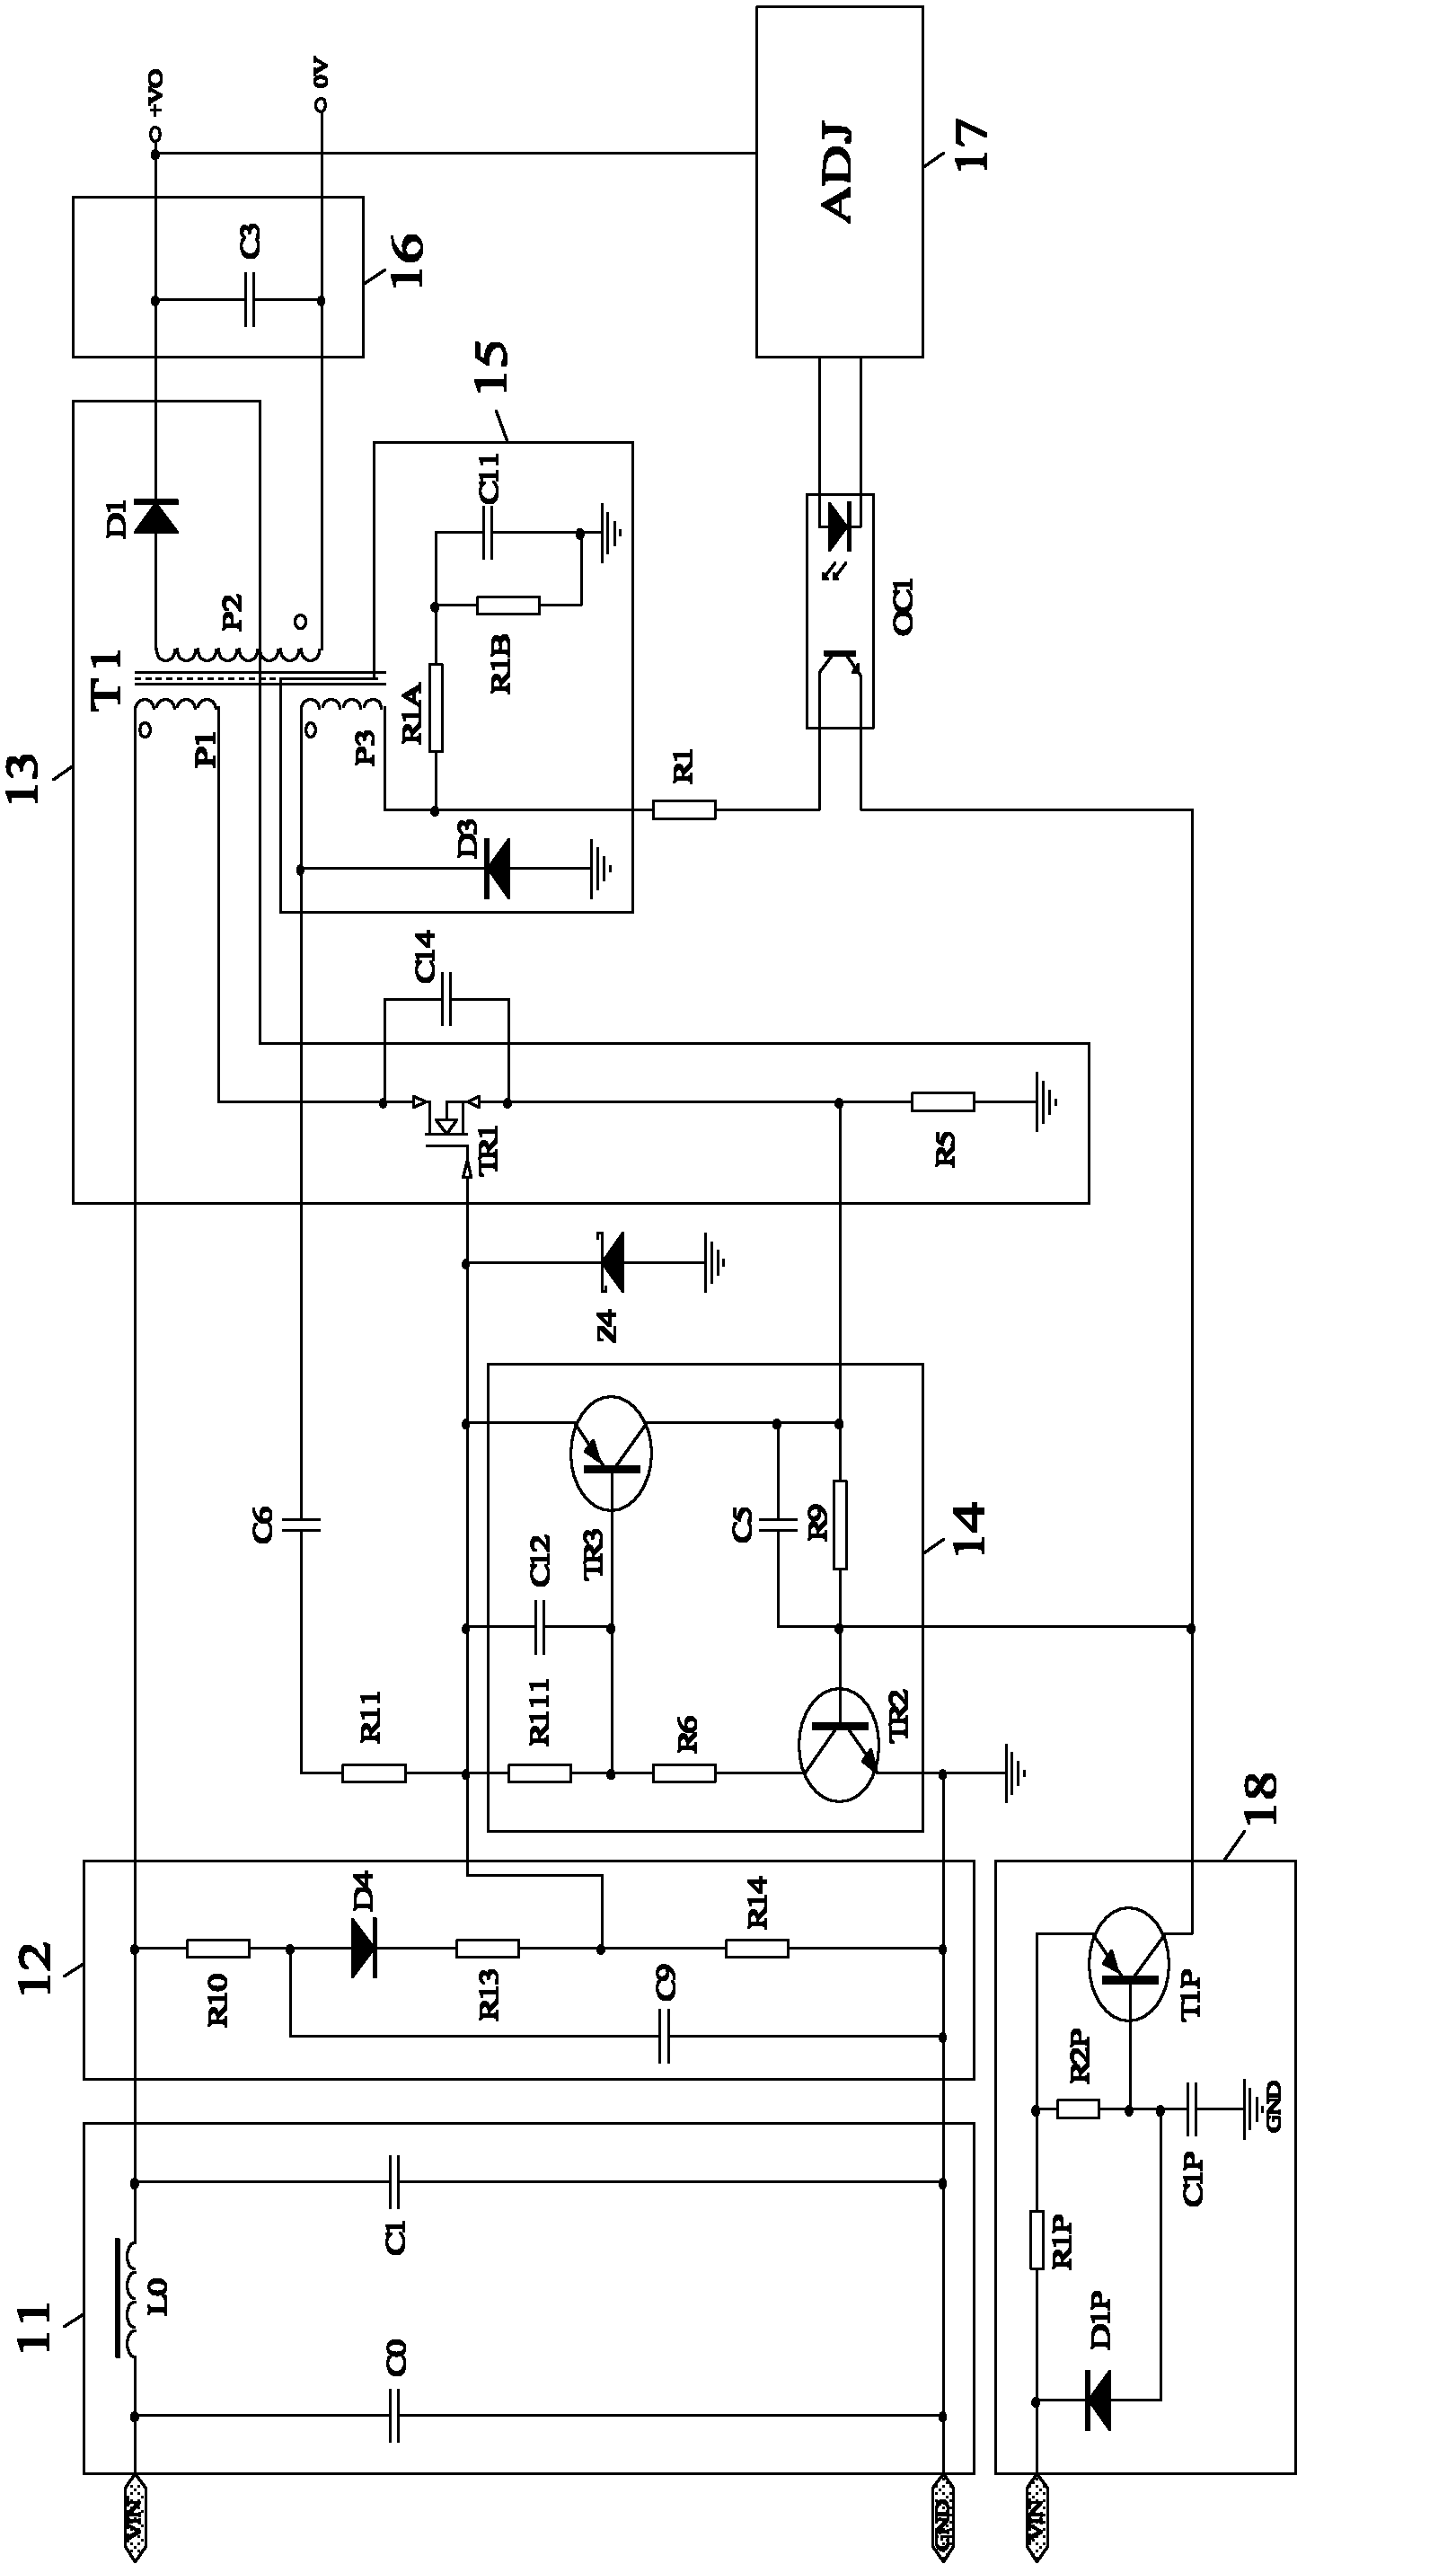 Power supply converter with controllable current peak inhibition protection